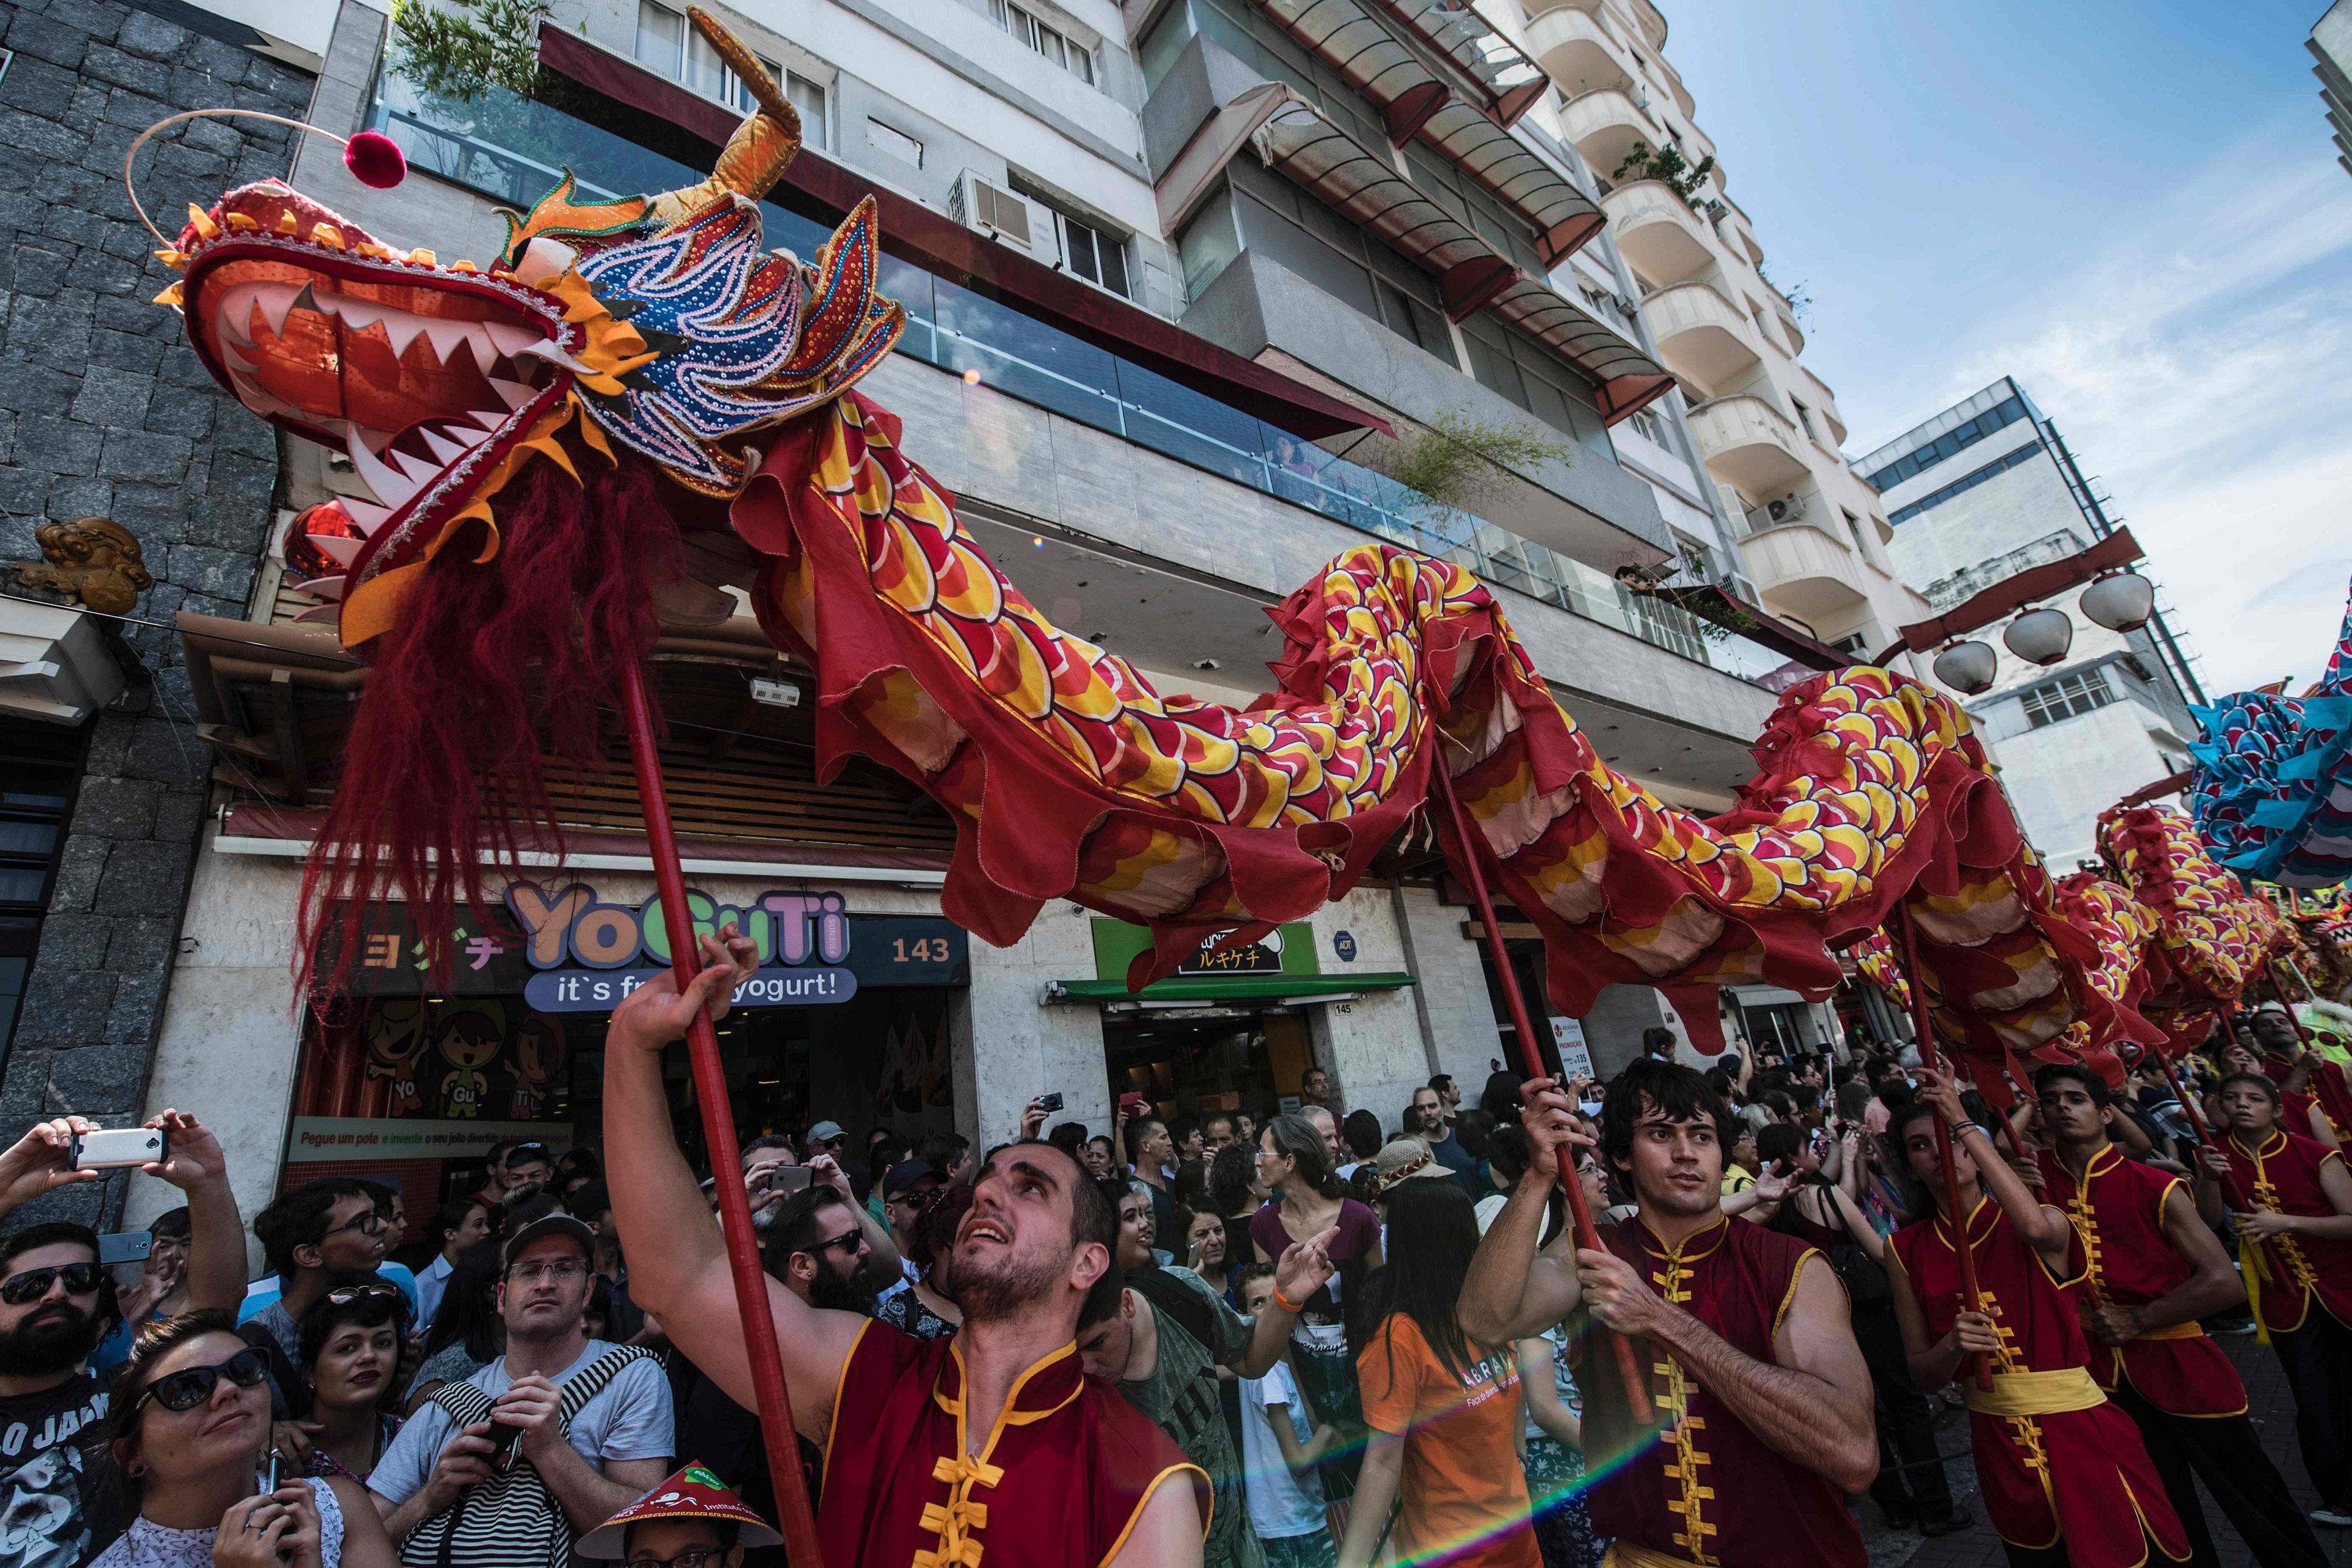 A dragon dance performed during Lunar New Year celebrations in Sao Paulo, Brazil, where cultural events meant to boost China’s standing have fallen short, according to a recent survey. Photo: AFP.